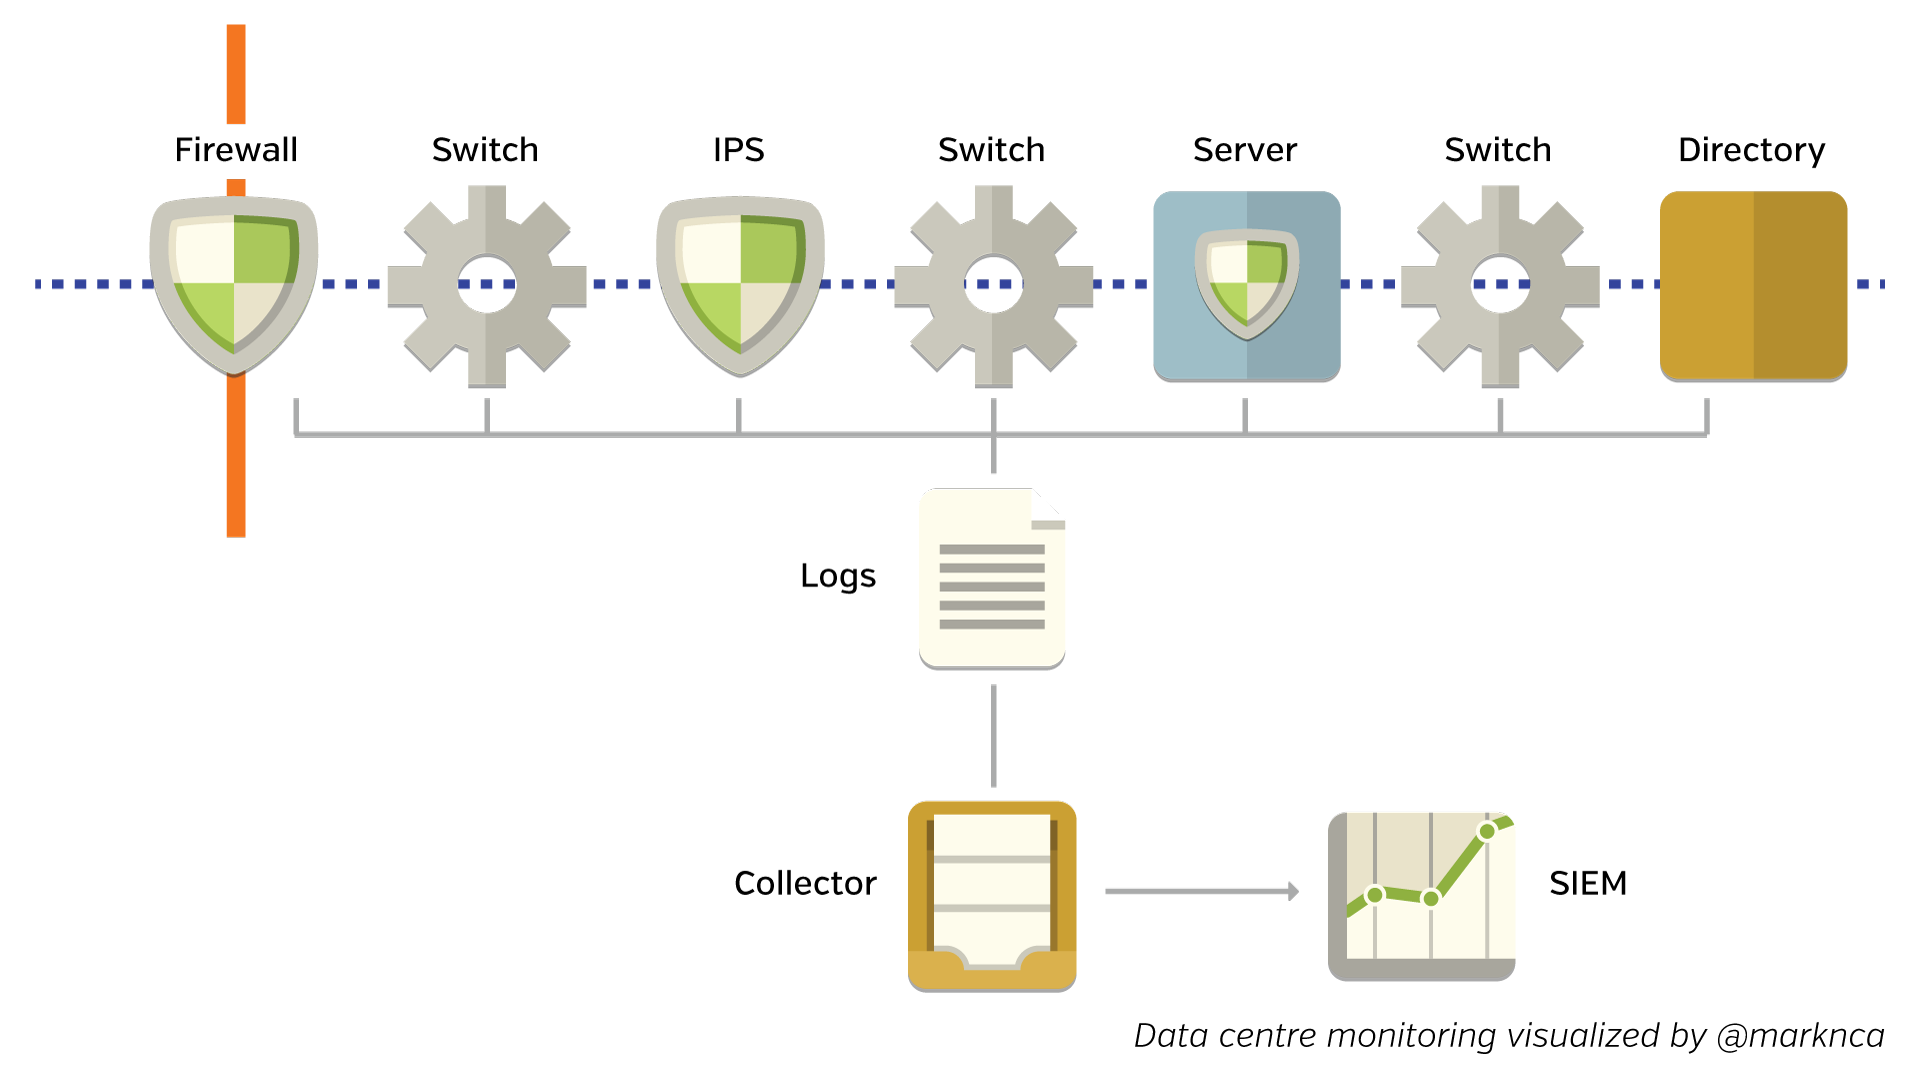 Monitoring workload in the data centre